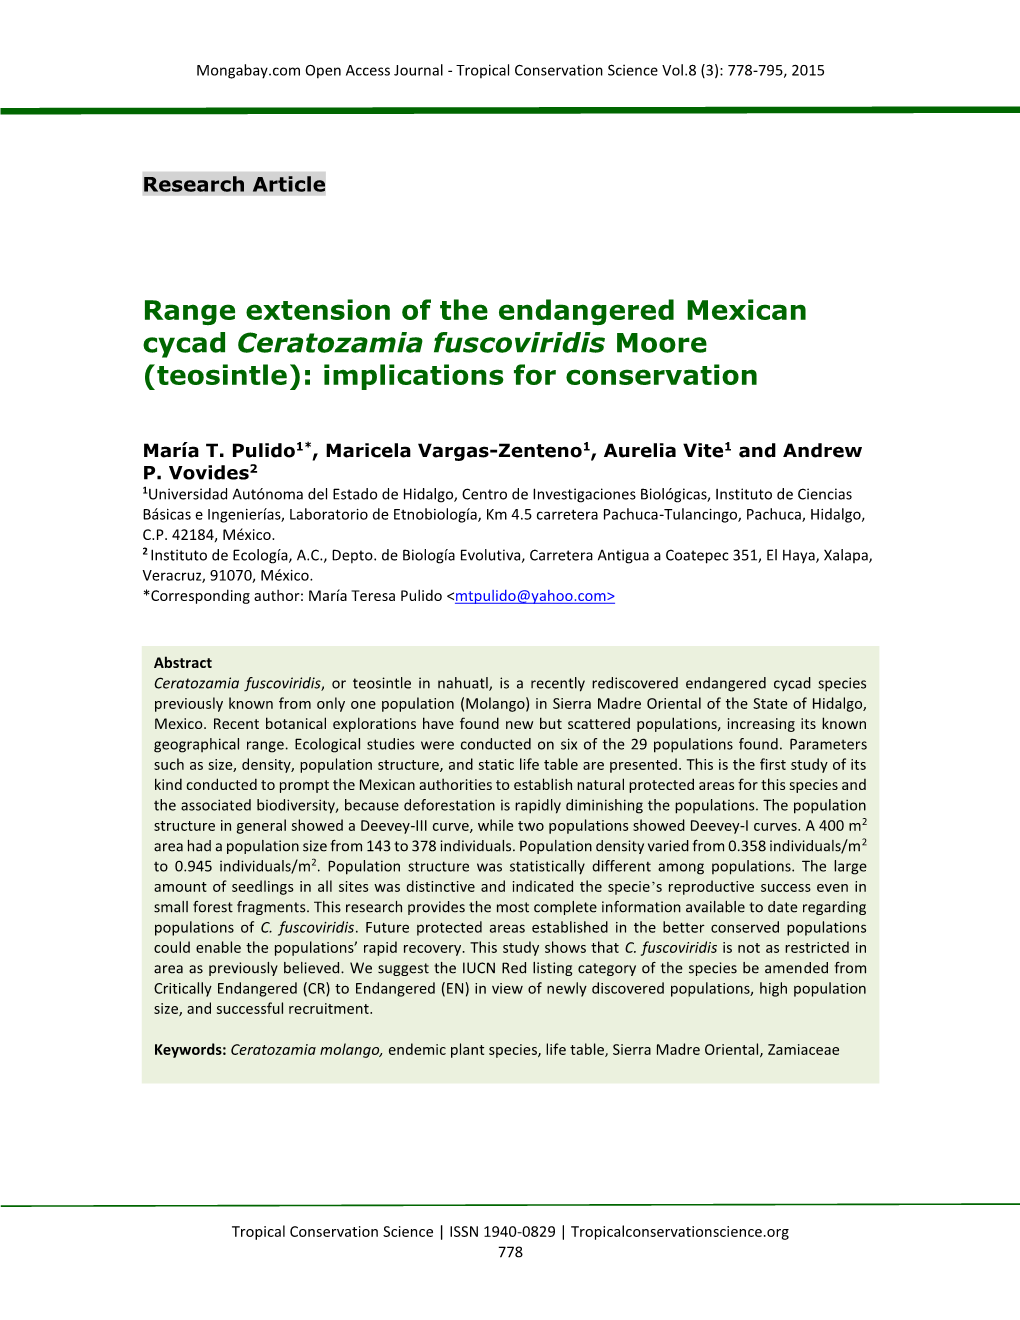 Range Extension of the Endangered Mexican Cycad Ceratozamia Fuscoviridis Moore (Teosintle): Implications for Conservation